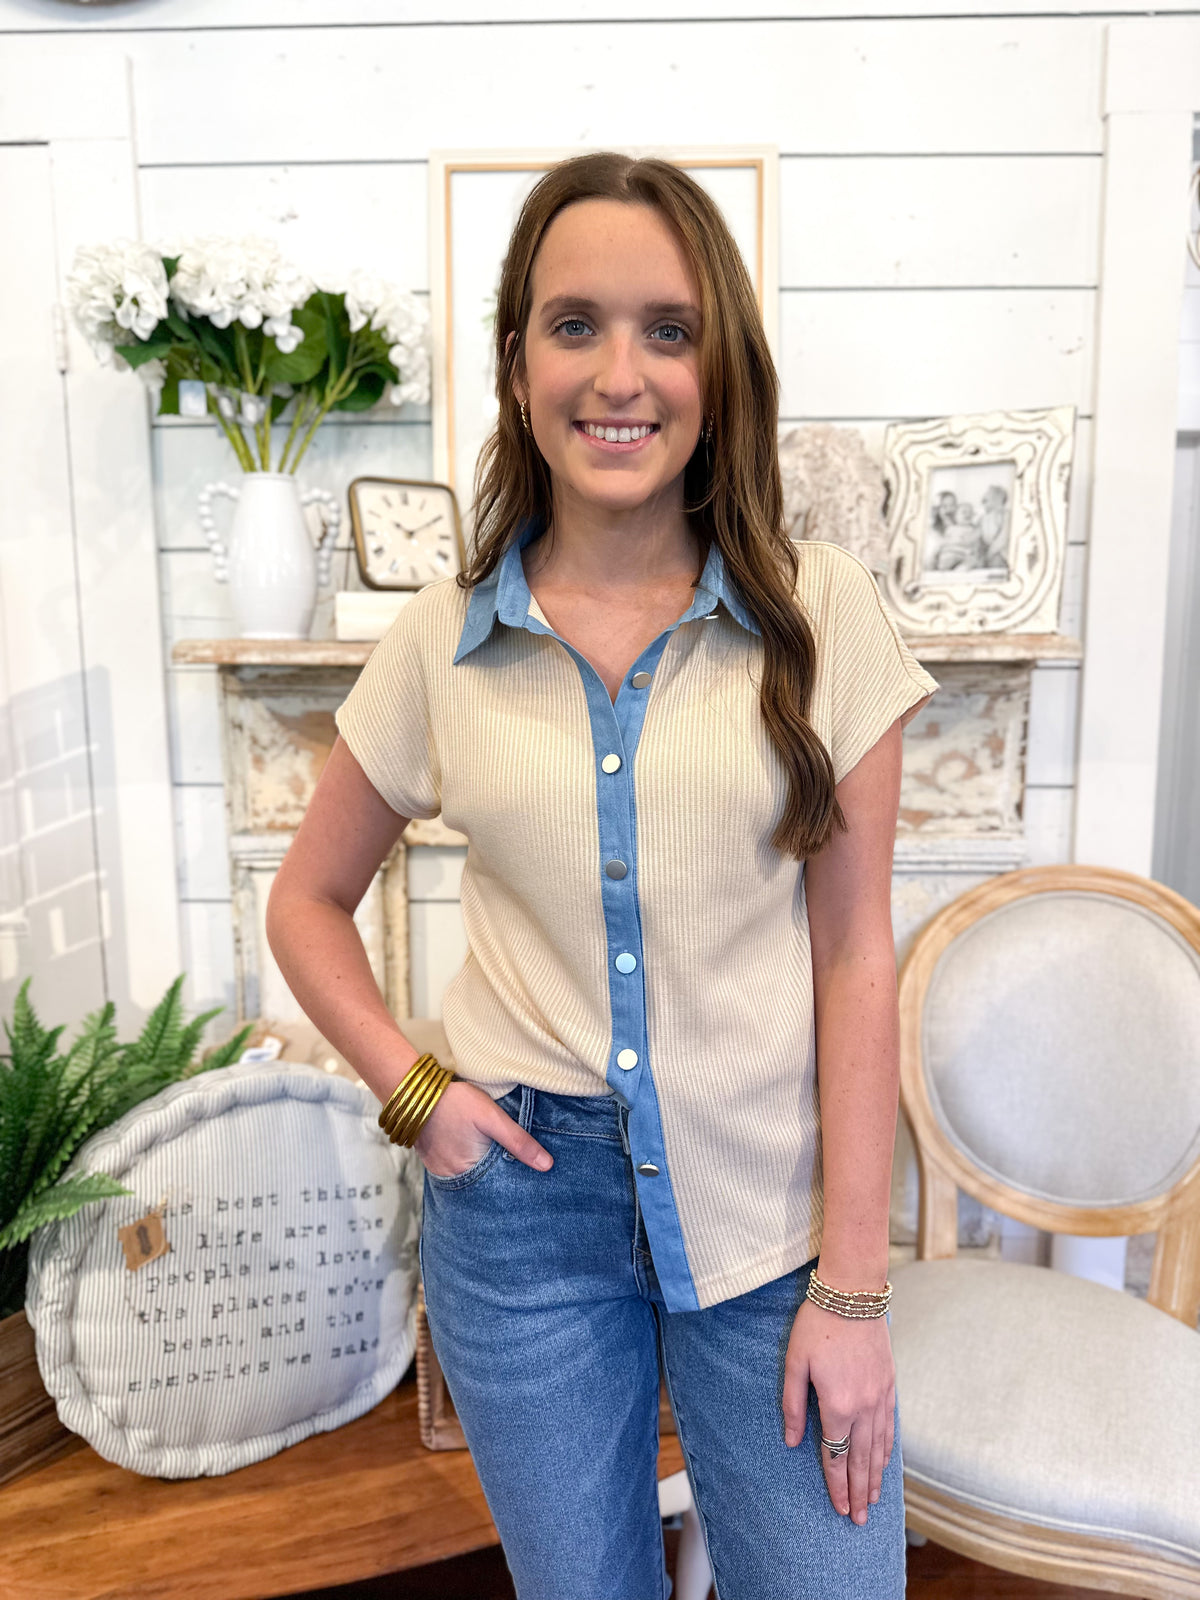 cream knit style top with denim blue collar. button down top. washco taylor top